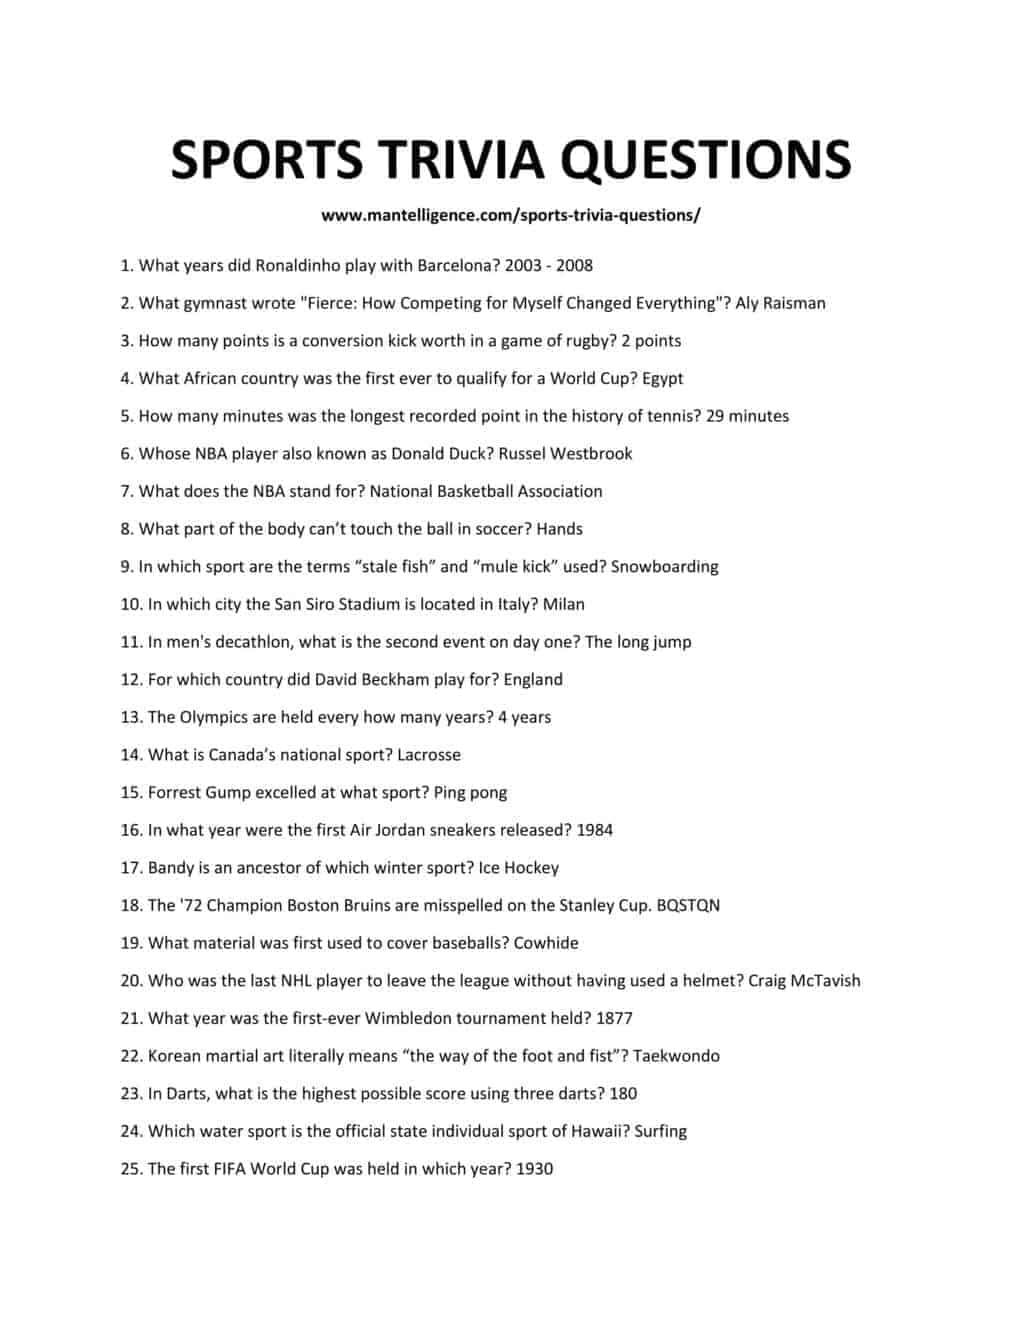 72 Best Sports Trivia Questions and Answers - Learn new facts.